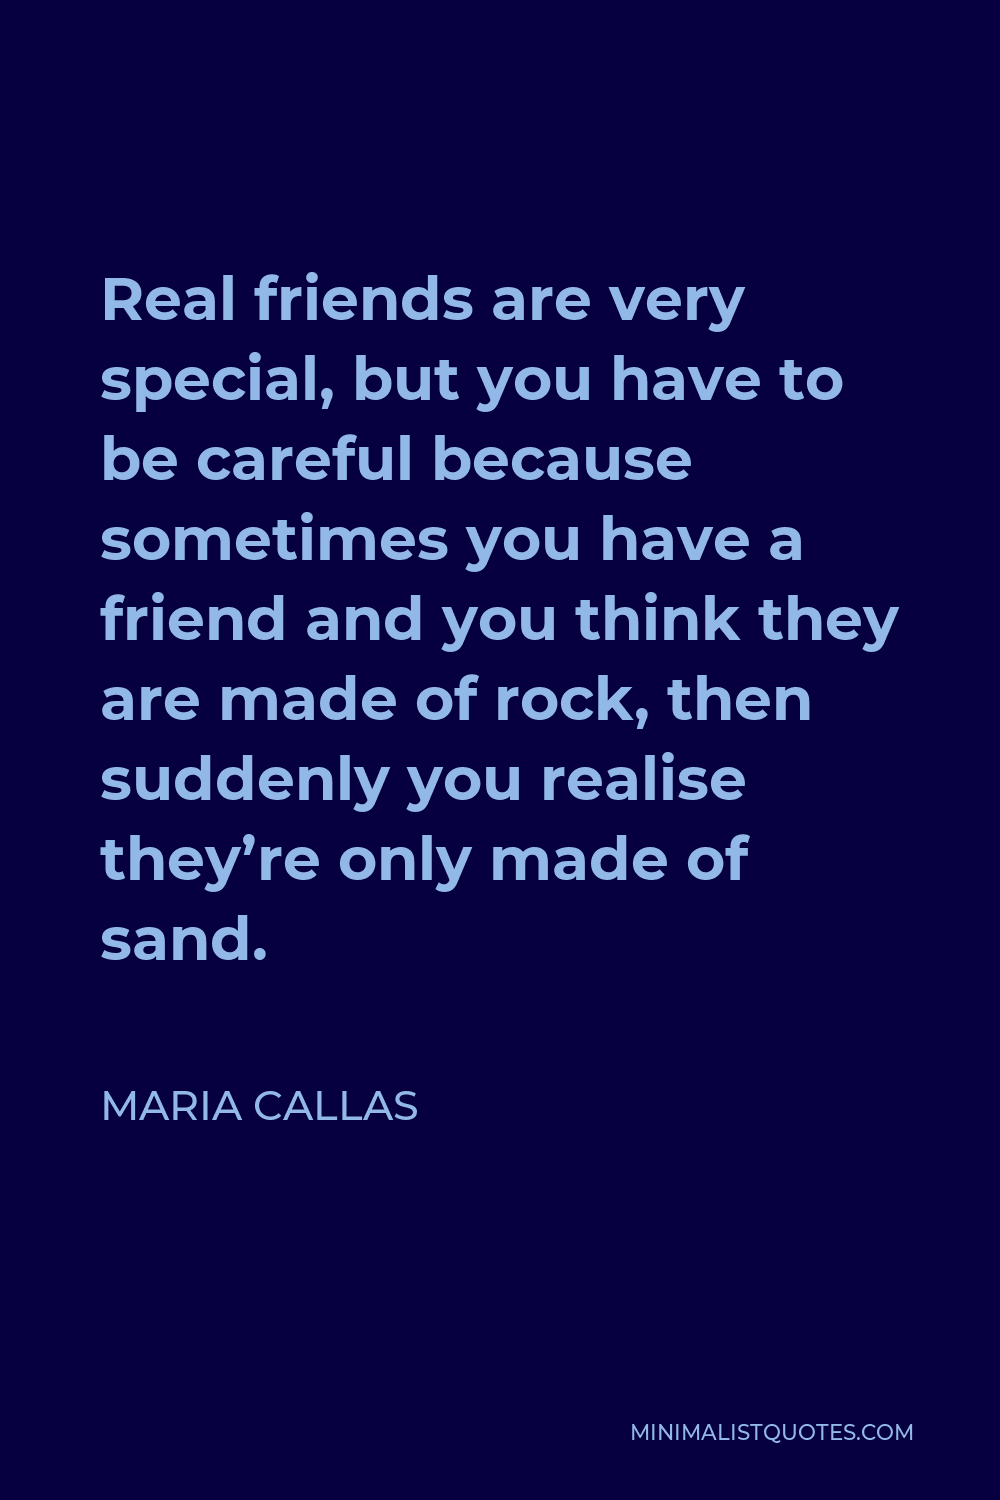 Maria Callas Quote - Real friends are very special, but you have to be careful because sometimes you have a friend and you think they are made of rock, then suddenly you realise they’re only made of sand.